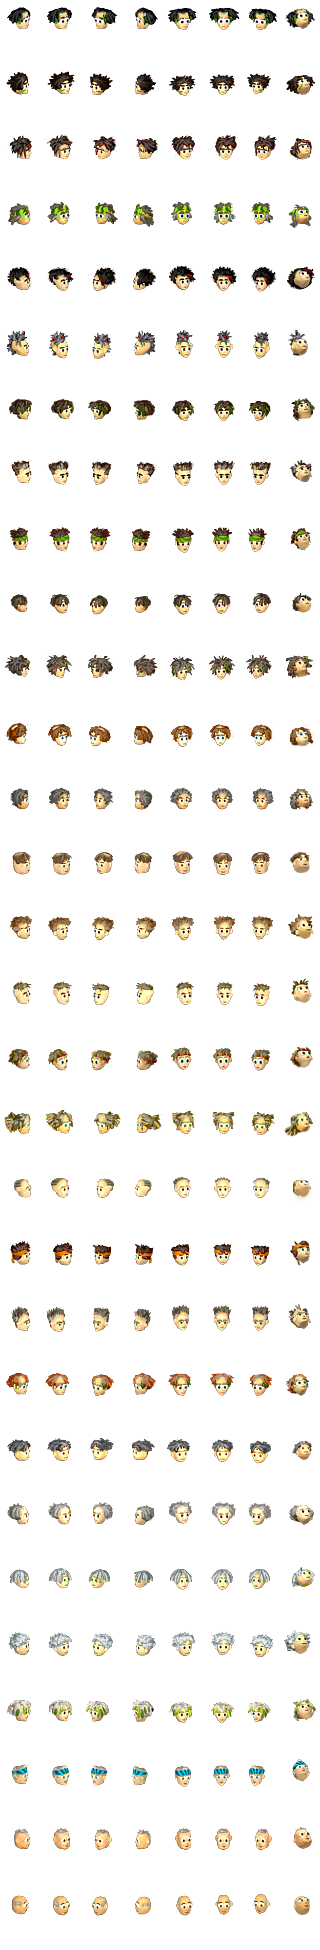 male_heads10.png